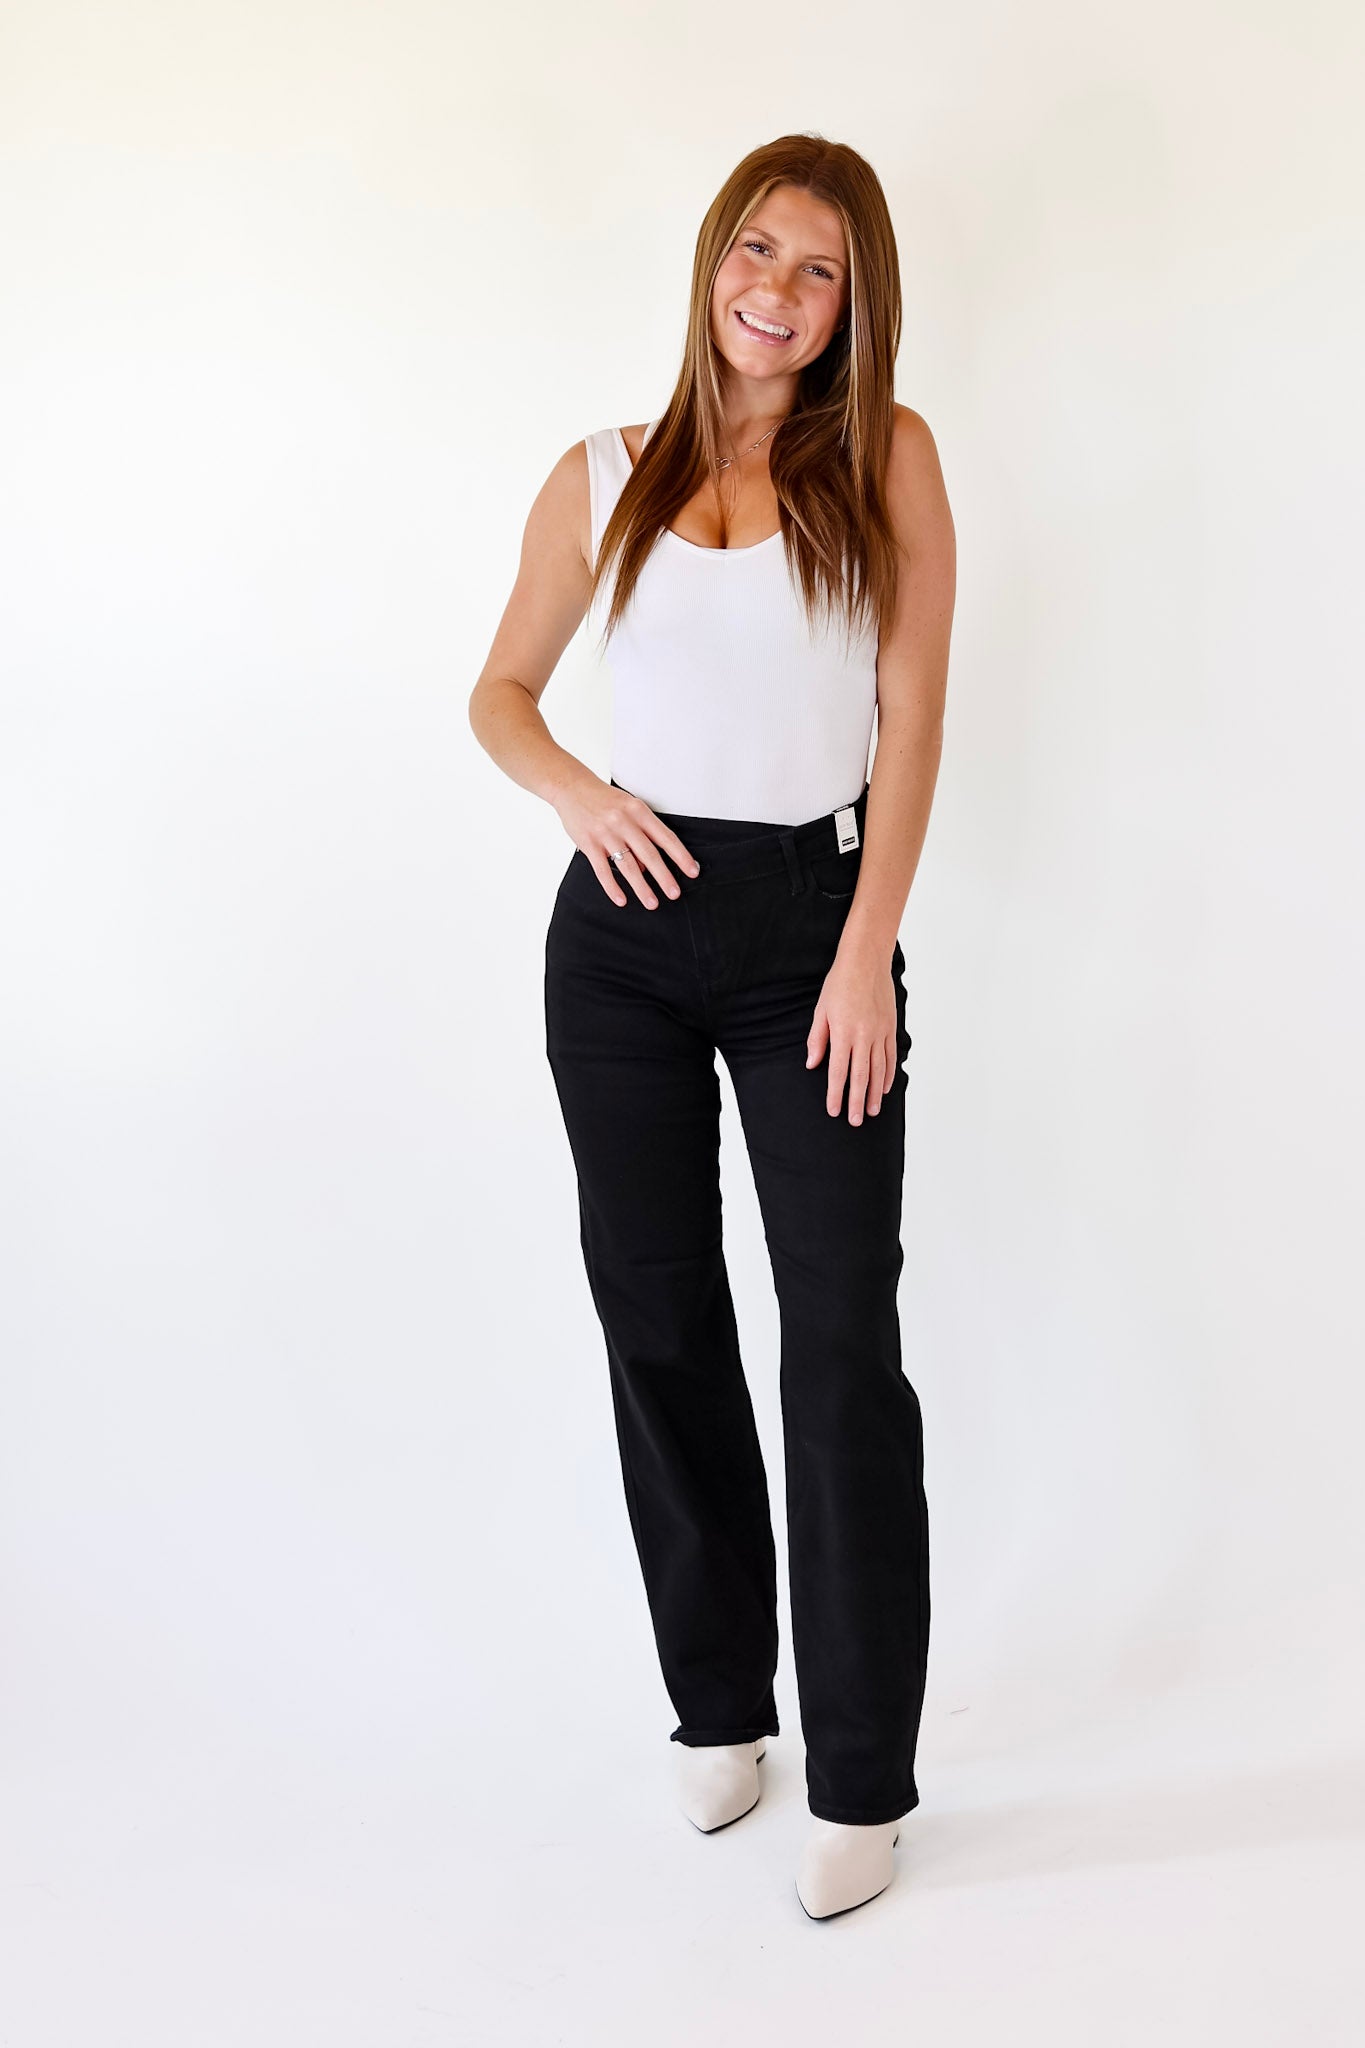 Judy Blue | Here Forward Criss-Cross Waistband Straight Leg Jeans in Black - Giddy Up Glamour Boutique